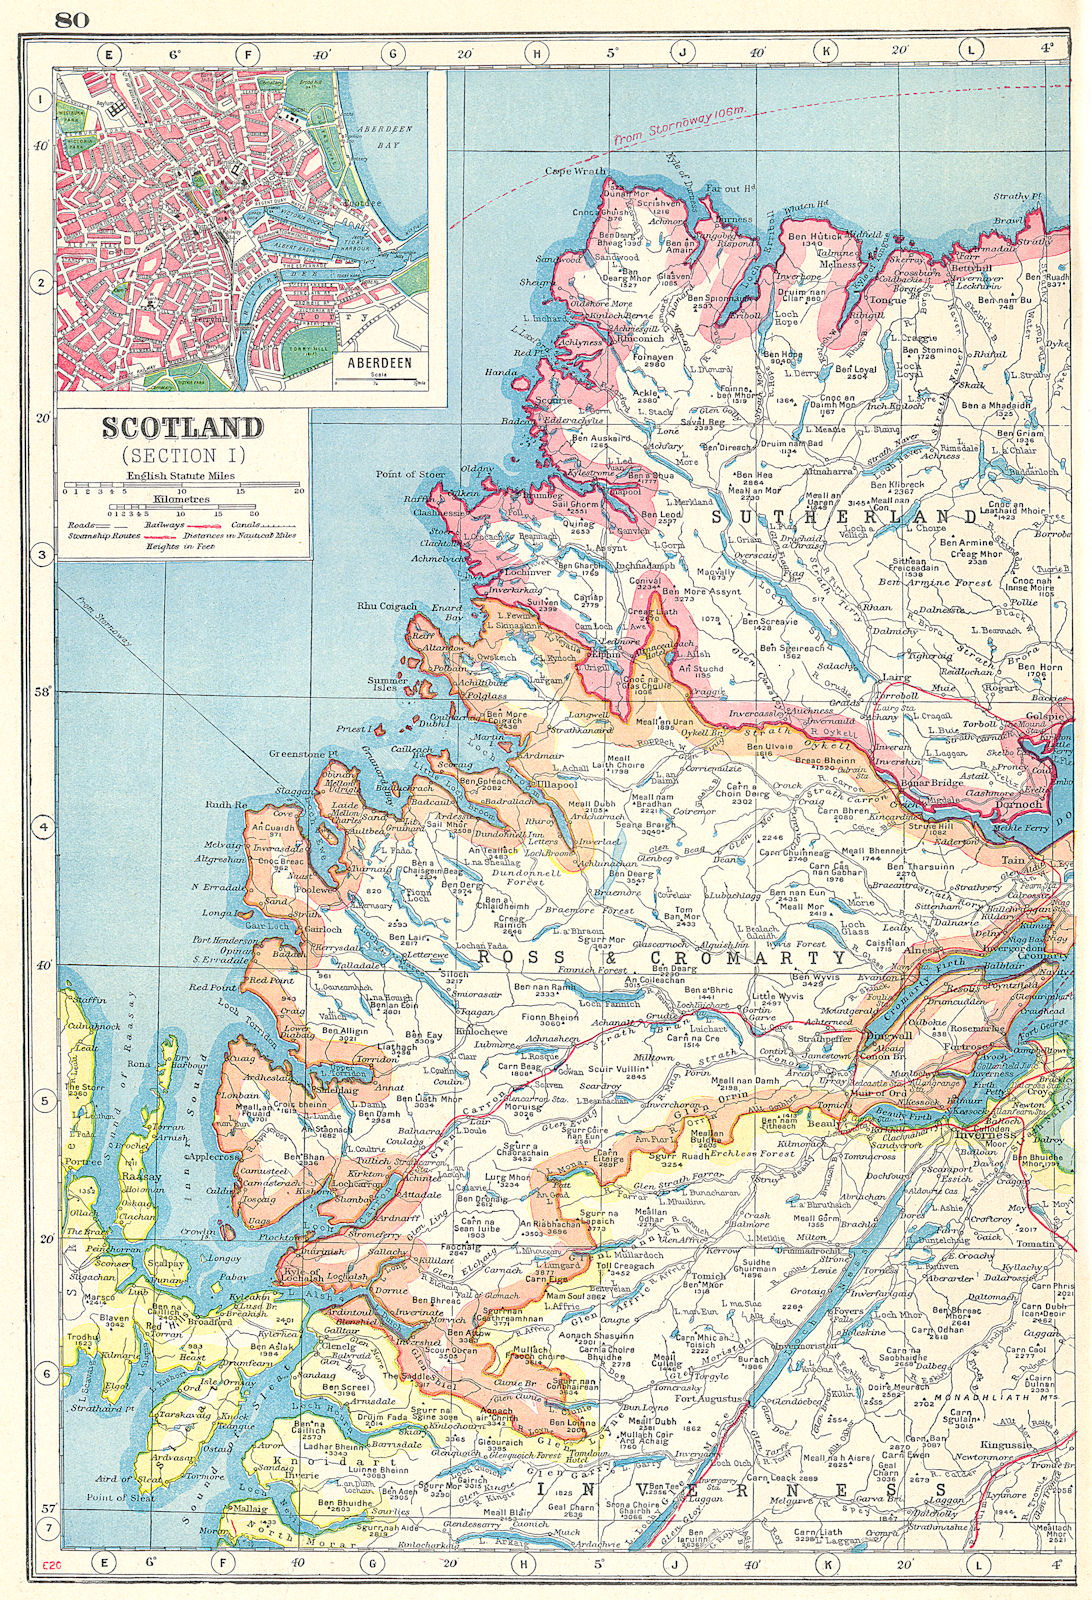 SCOTTISH HIGHLANDS.Sutherland Ross & Cromarty Inverness-shire.Aberdeen 1920 map